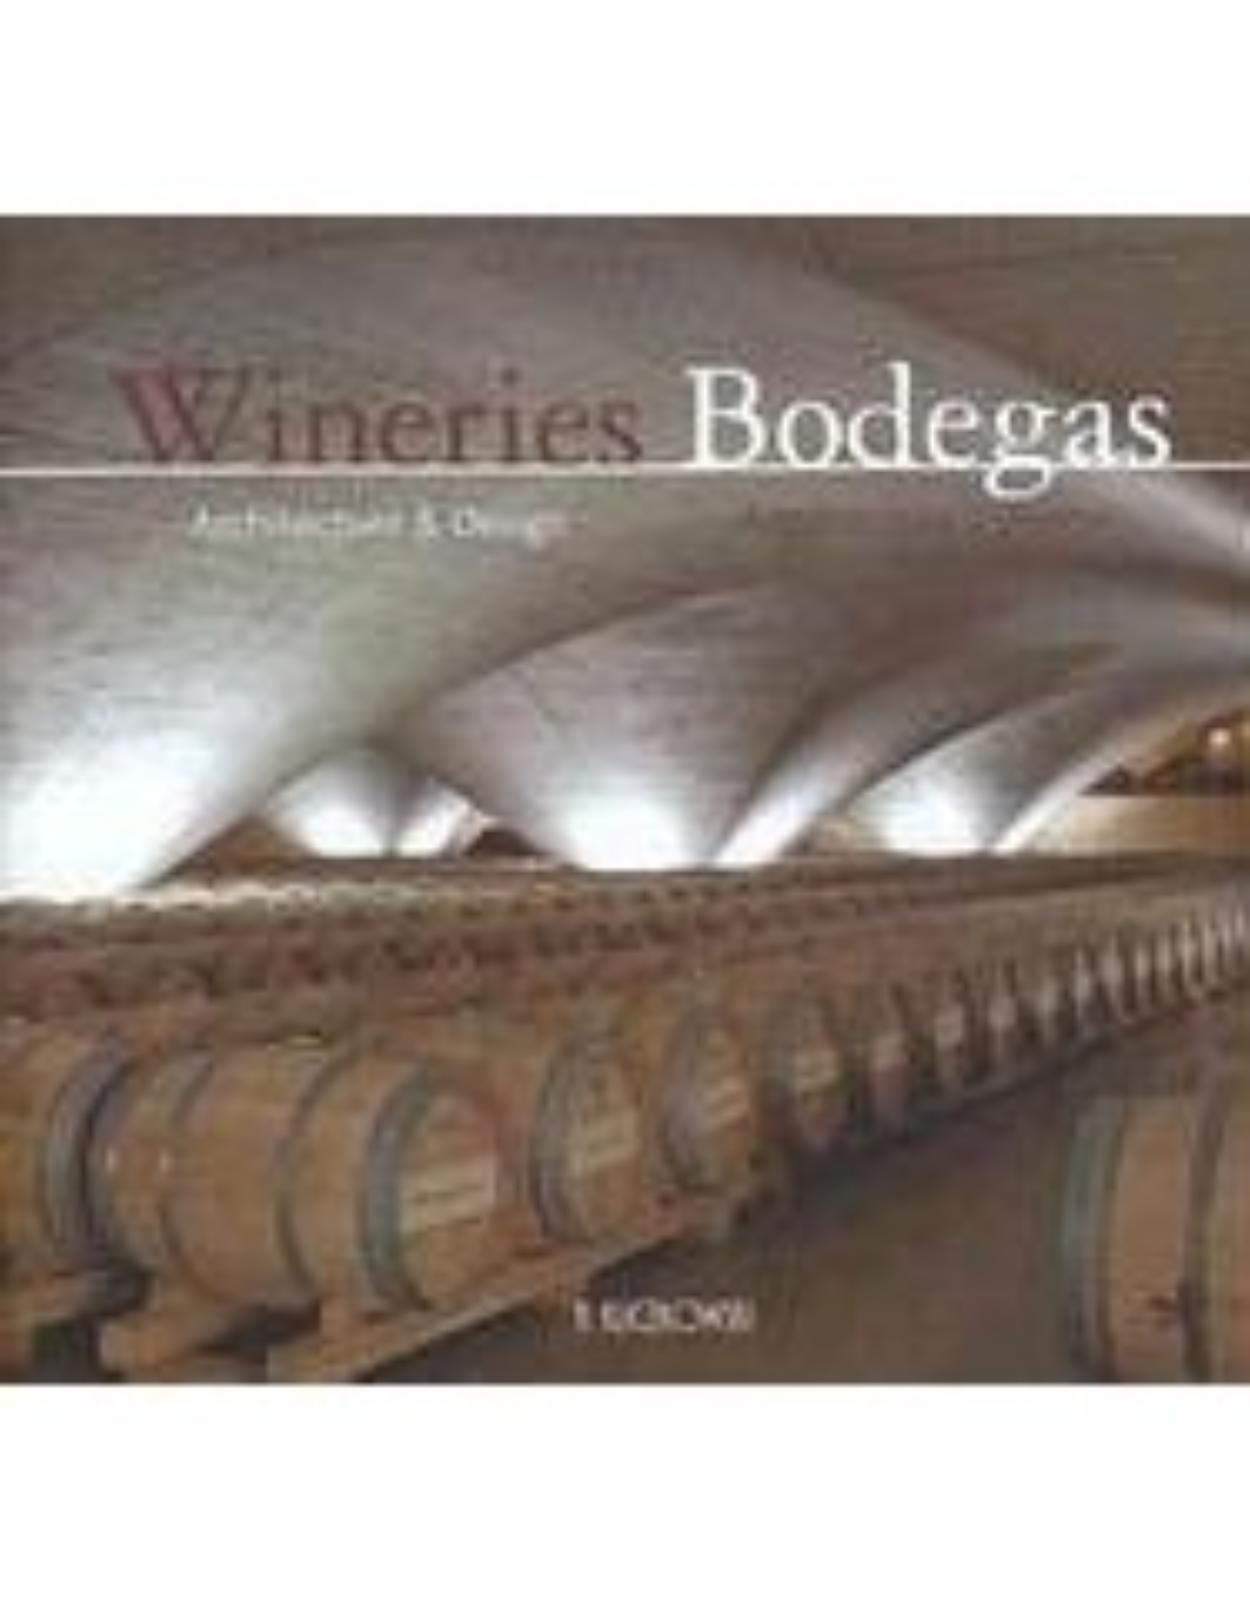 Wineries / Bodegas: Architecture And Design